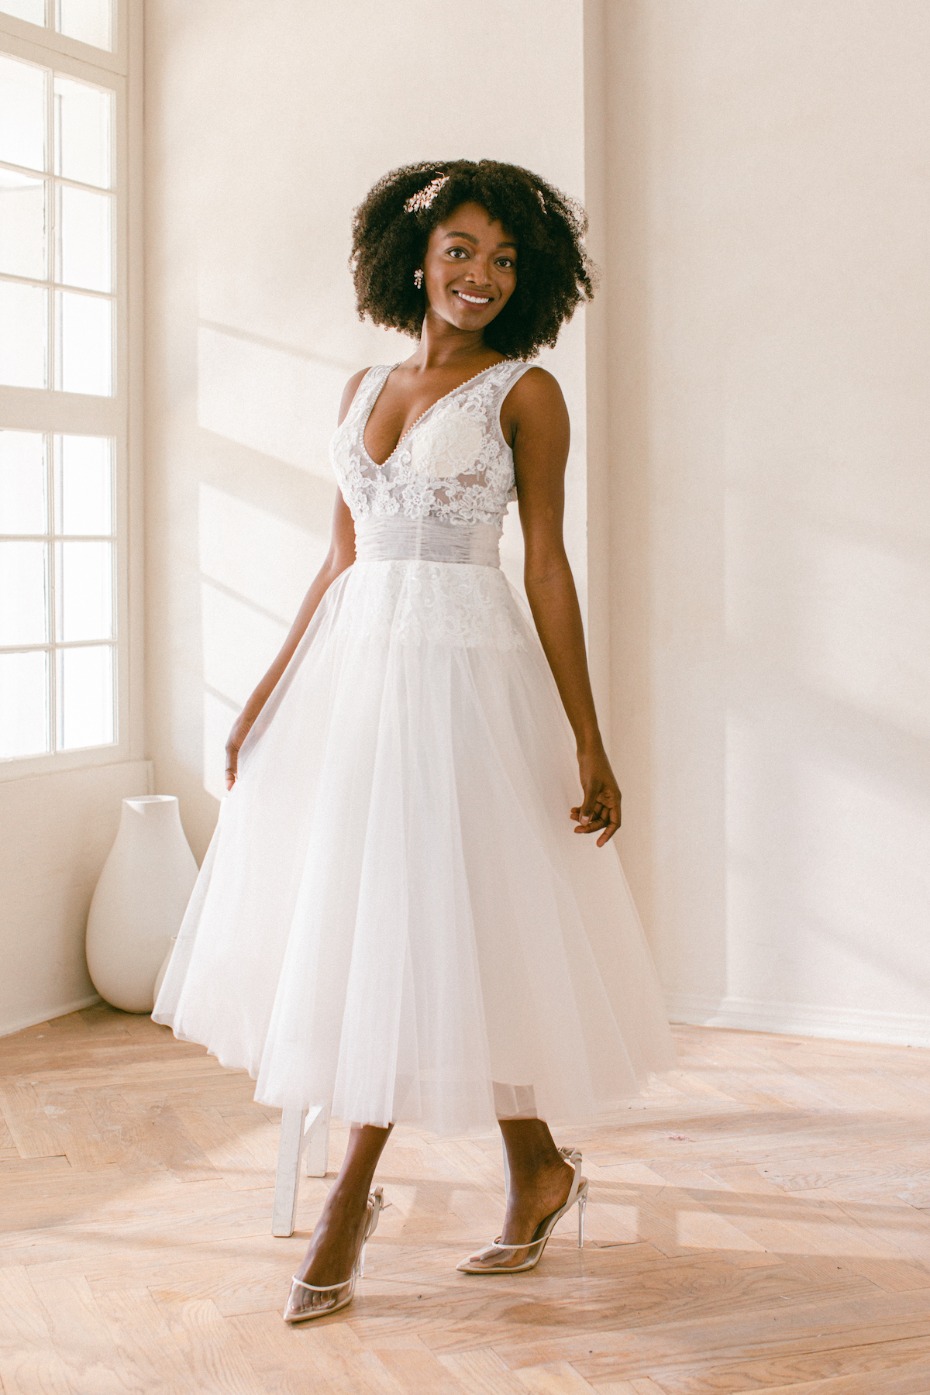 7 Tips From Afarose to Guarantee Shopping for Your Wedding Dress Online Is Successful